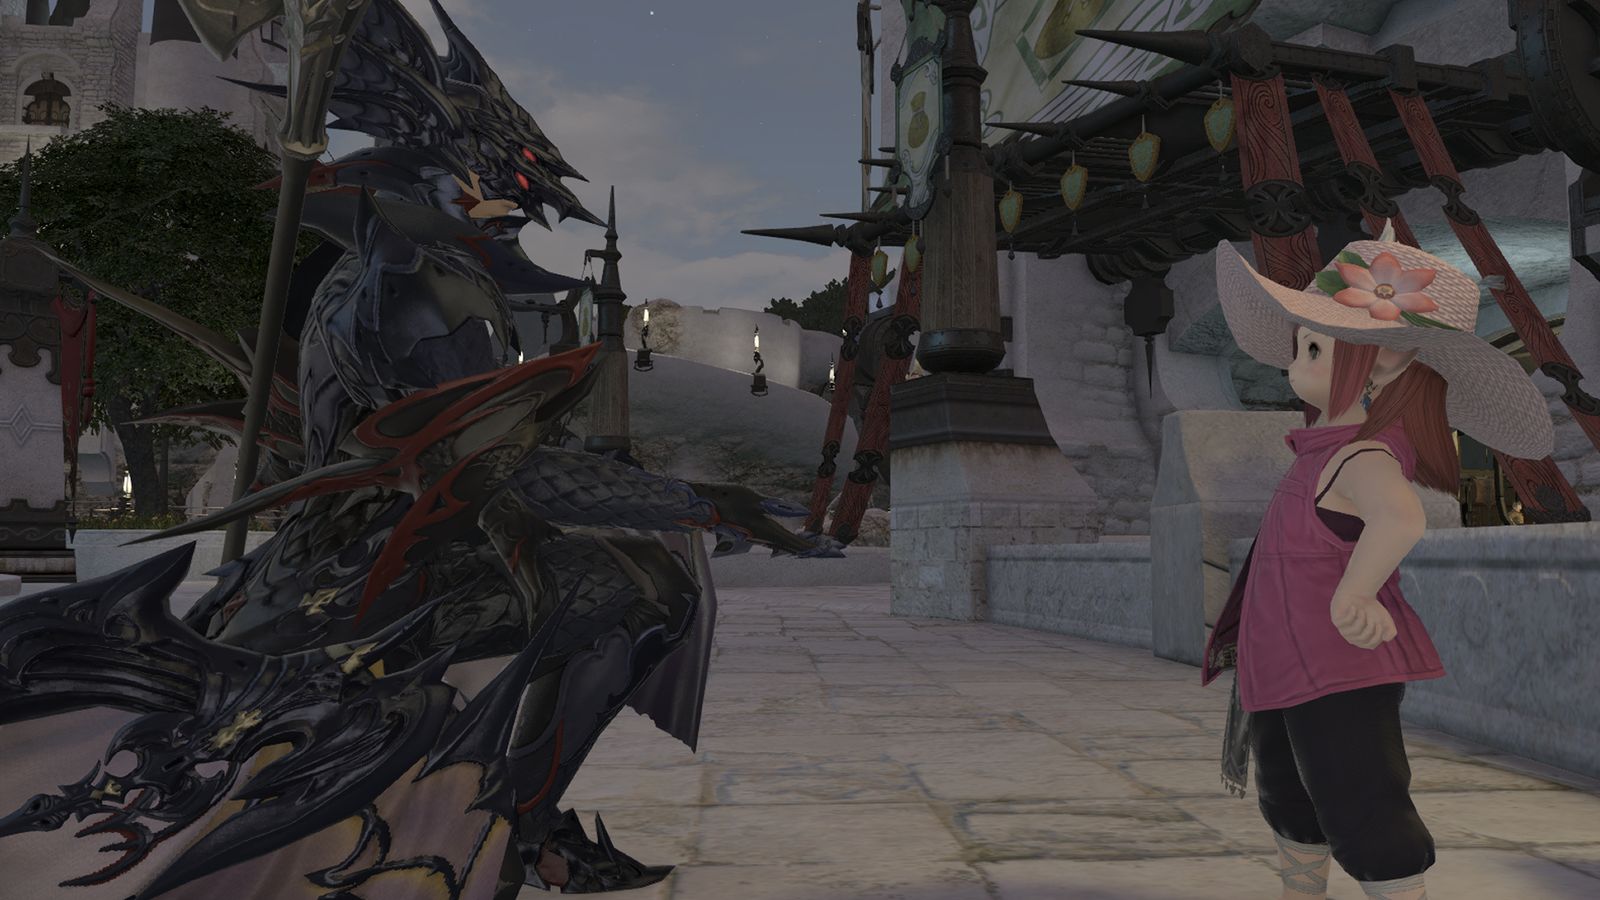 An image of a dragoon from Final Fantasy XIV handing in tomestones to a Rowena's Representative for their Heavensward Anima Relic Weapon grind. 